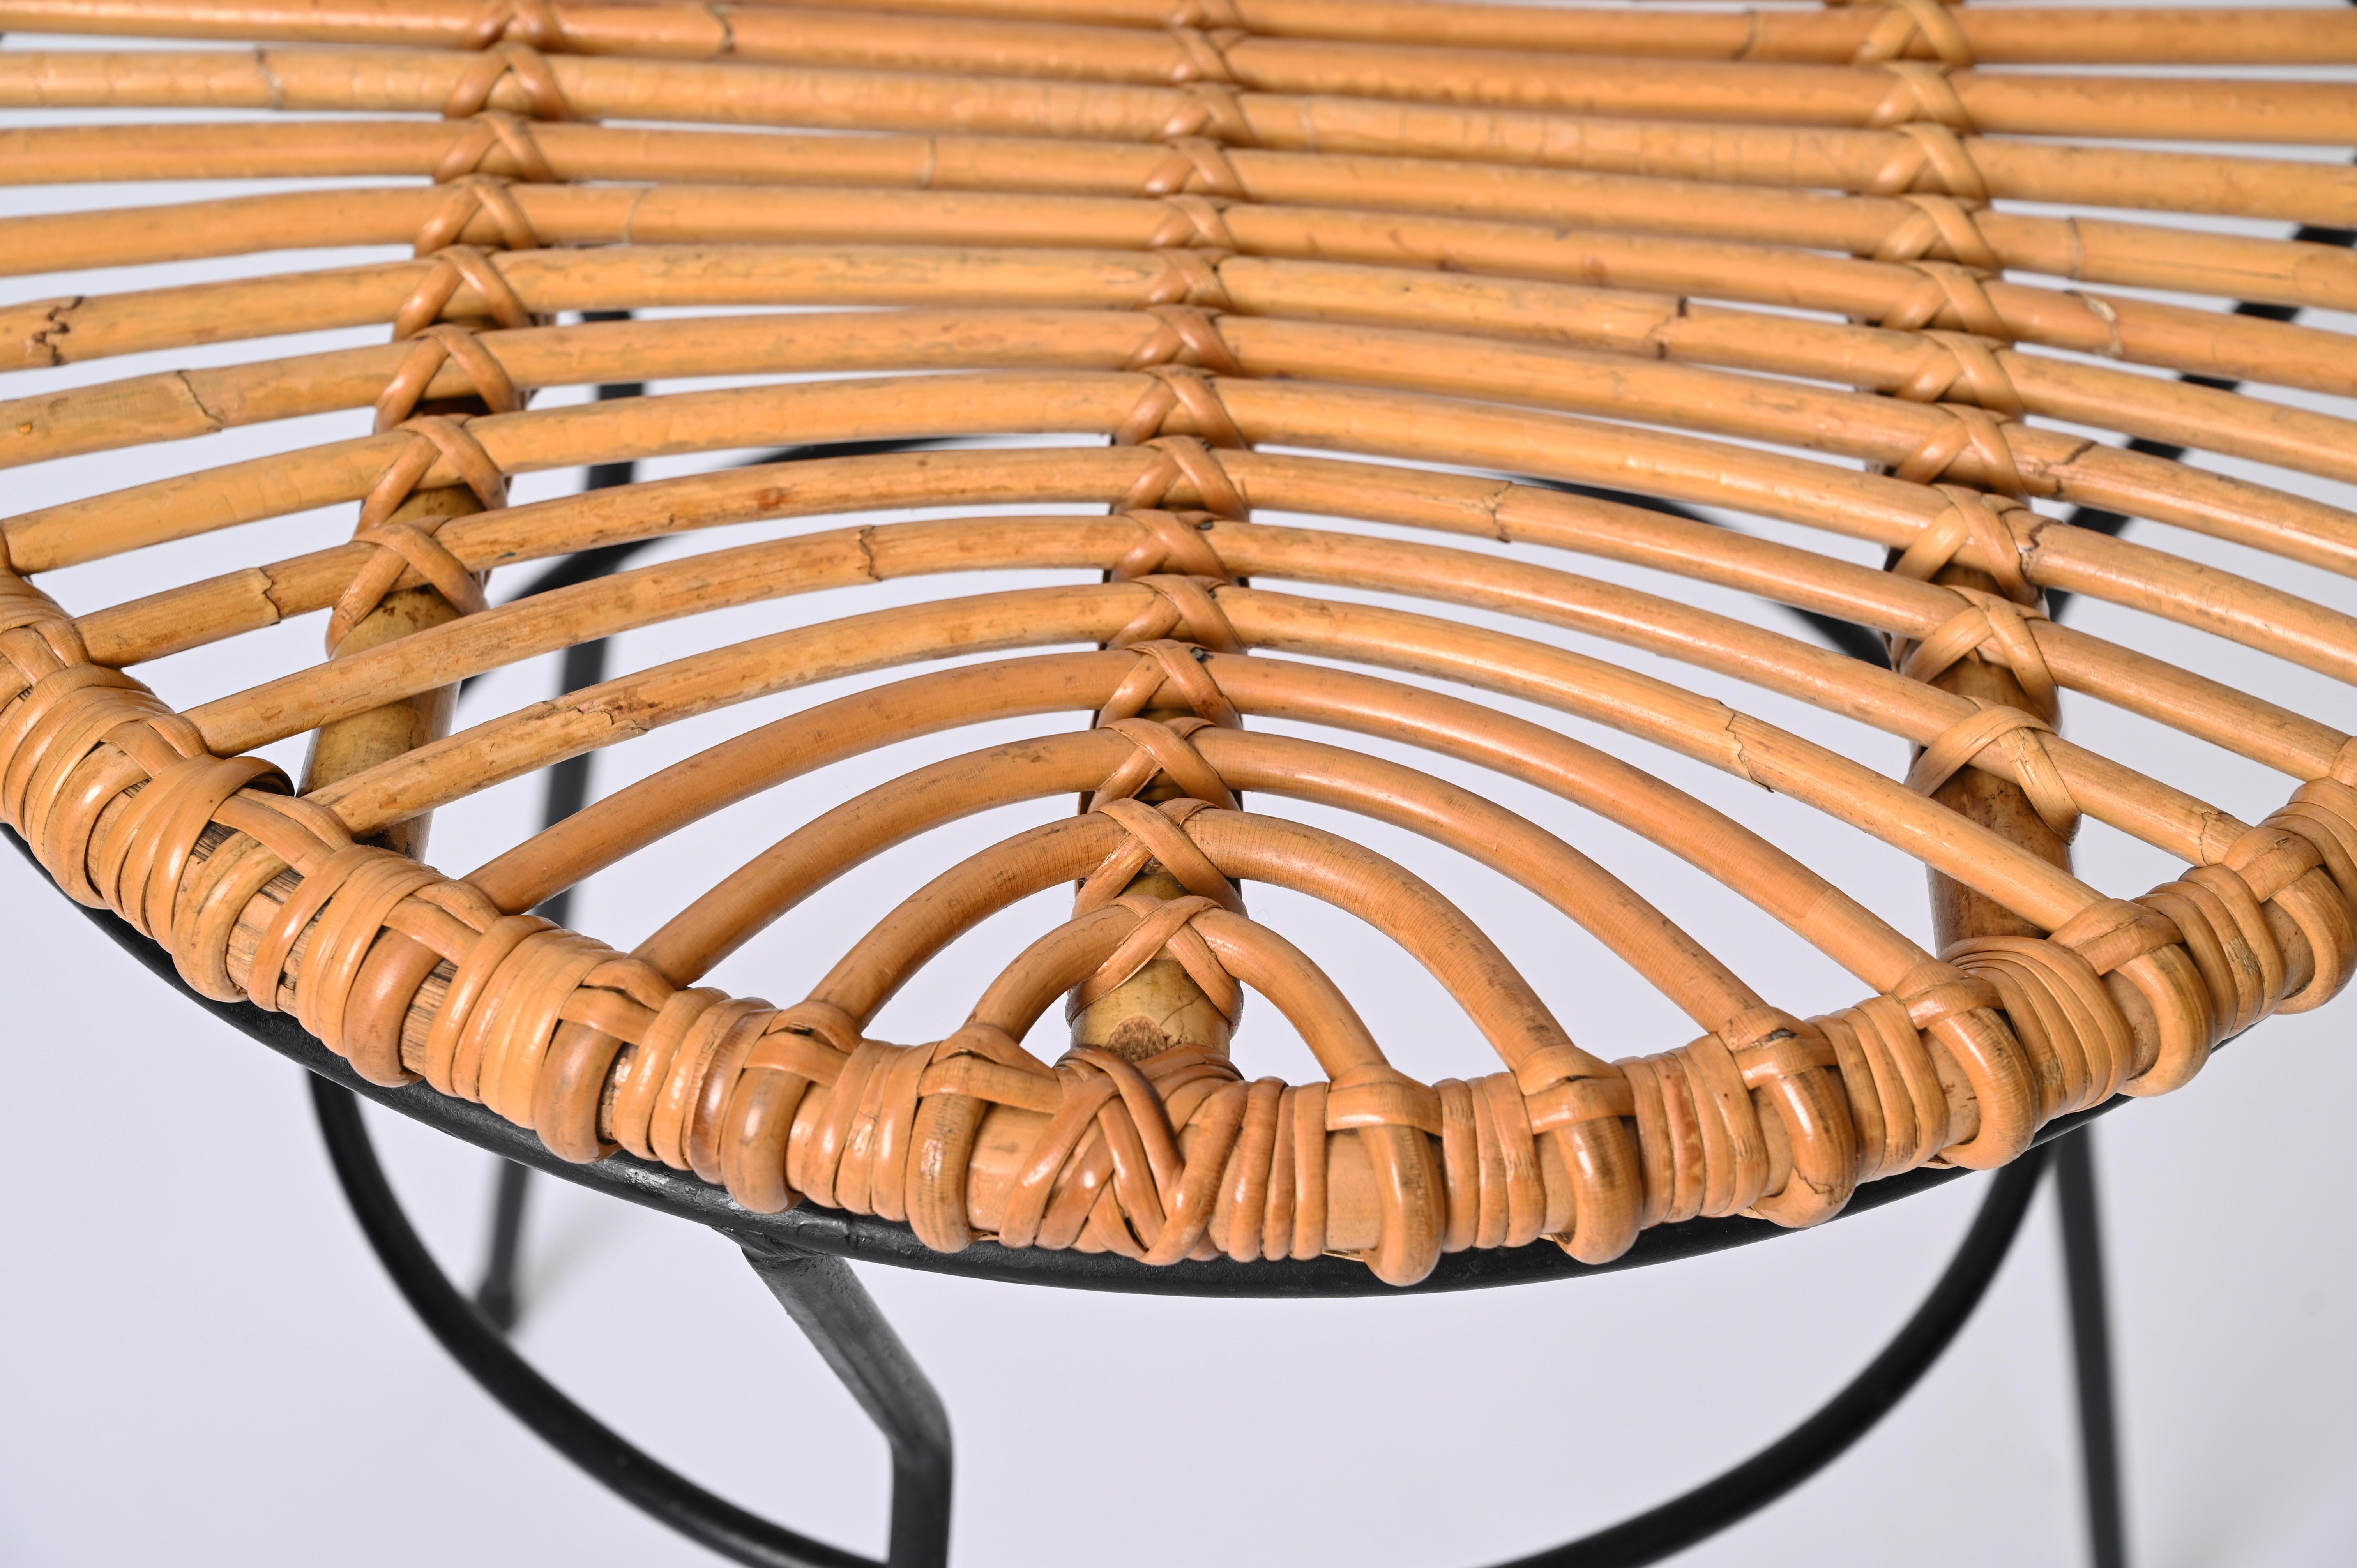 French Riviera Rattan, Wicker and Iron Coffee Table, Roberto Mango, Italy 1960s For Sale 4